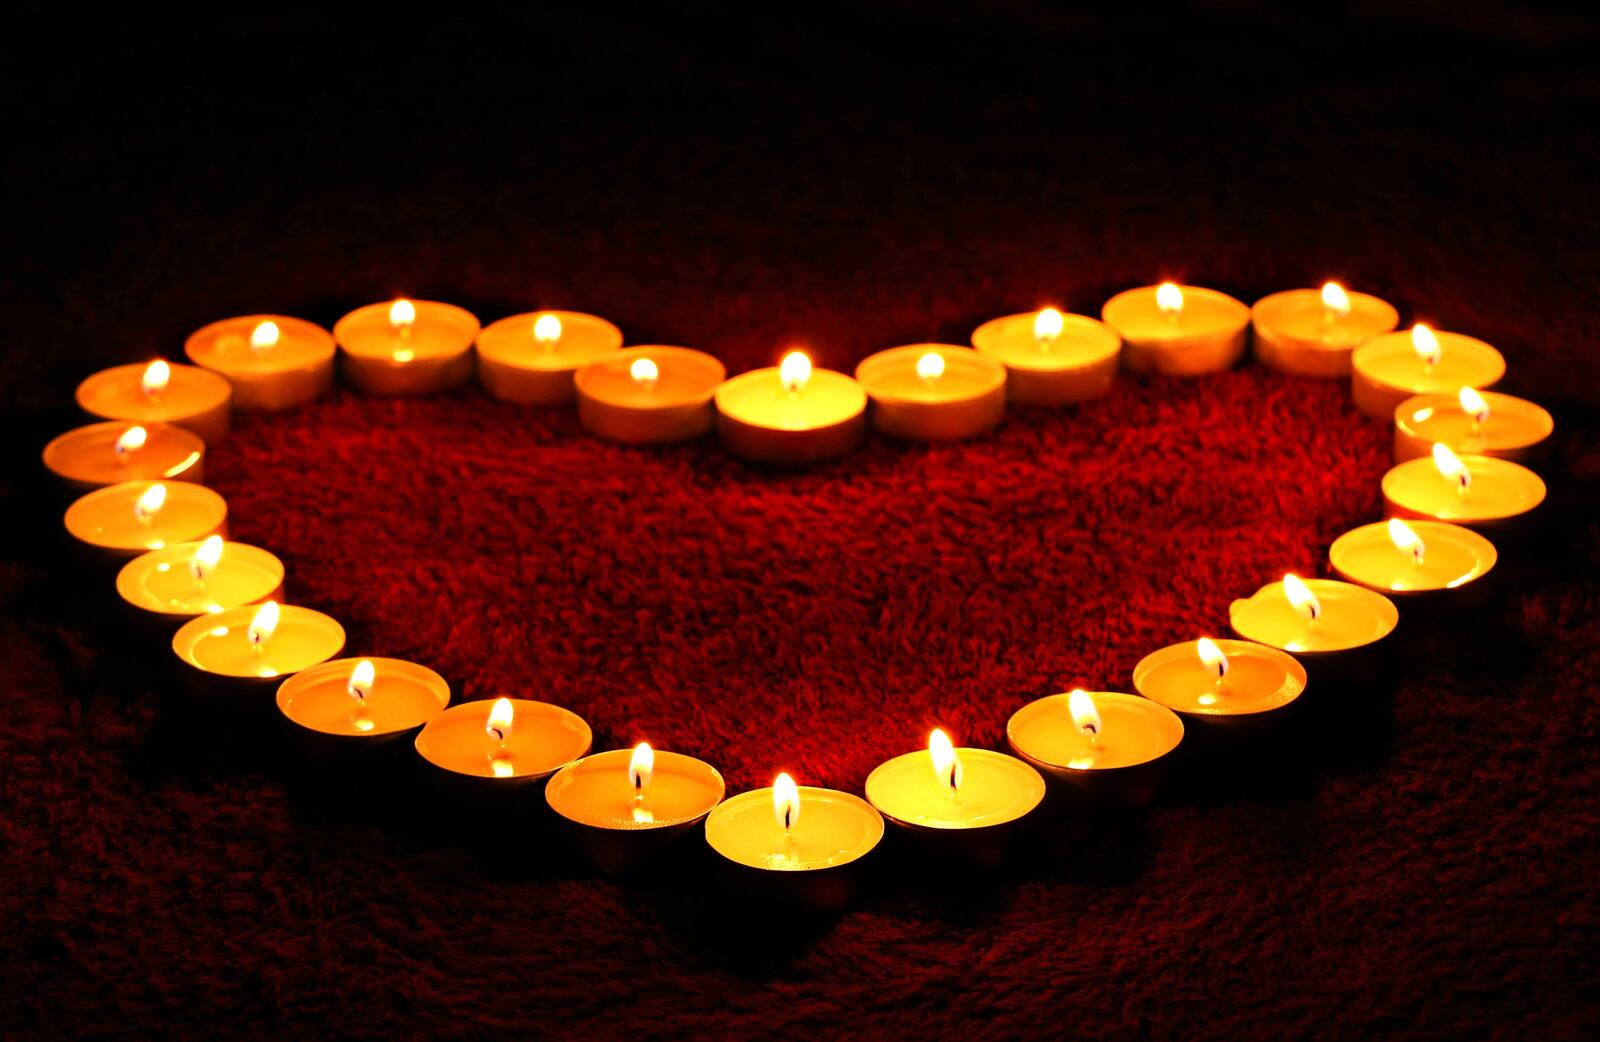 Free photo A glowing heart of little candles